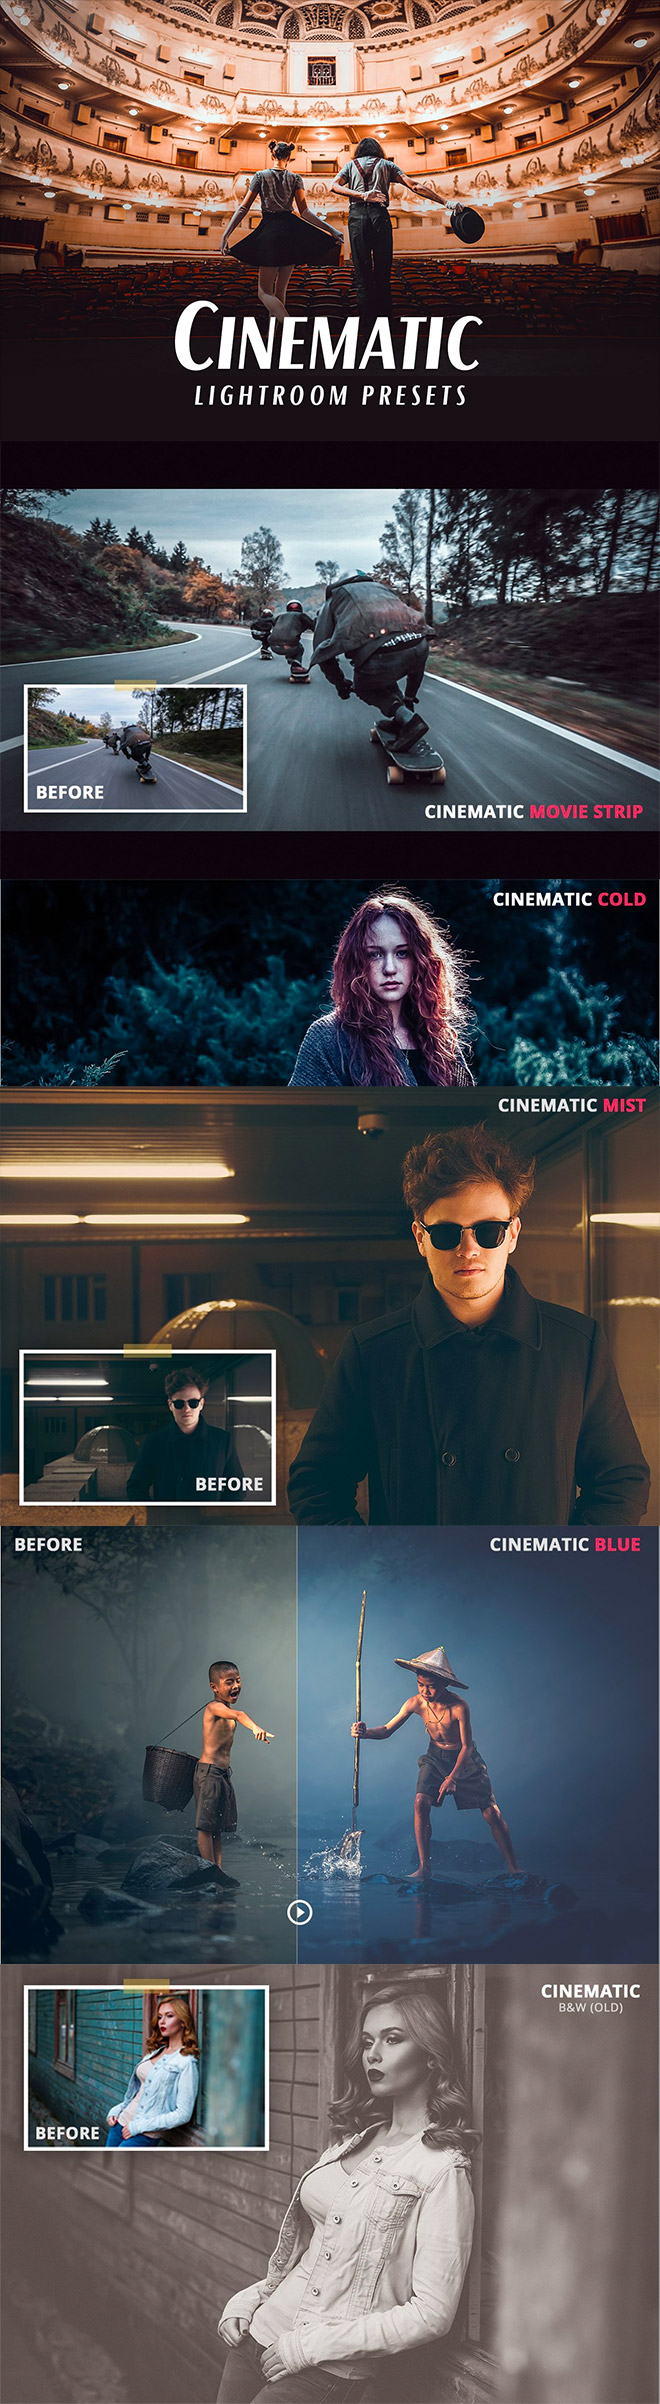 Cinematic Photo Effect Lightroom Presets and Photoshop Actions